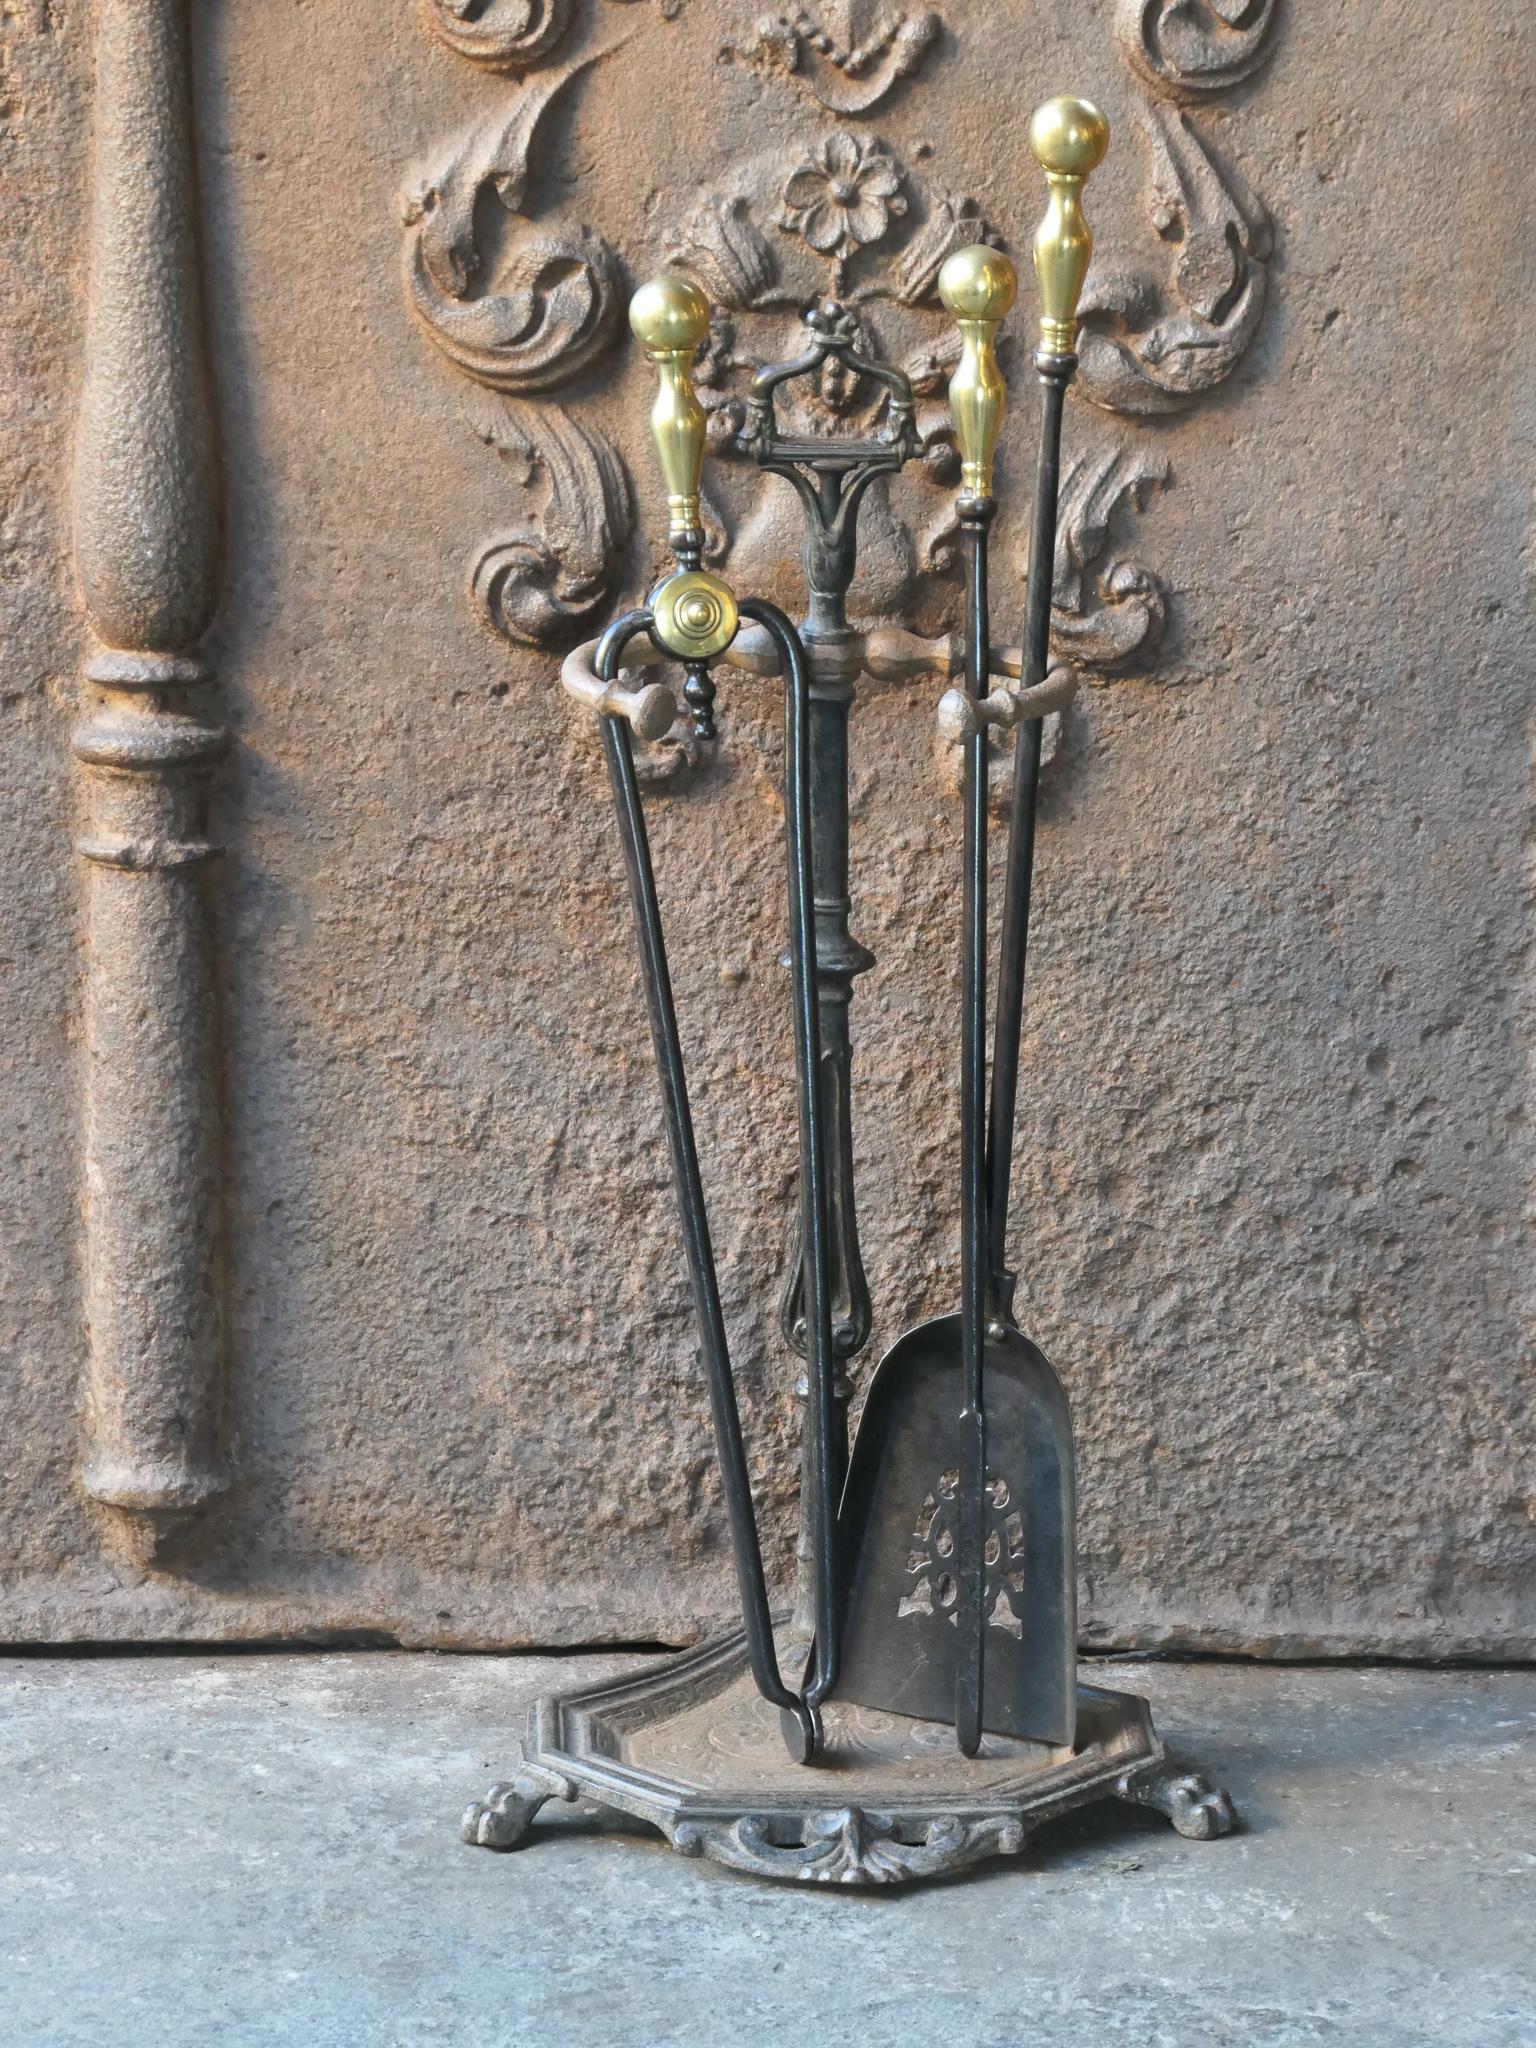 19th Century English Victorian period fireplace tool set. The tool set consists of thongs, shovel, poker and stand. Made of wrought iron, brass and polished brass. It is in a good condition and is fully functional.